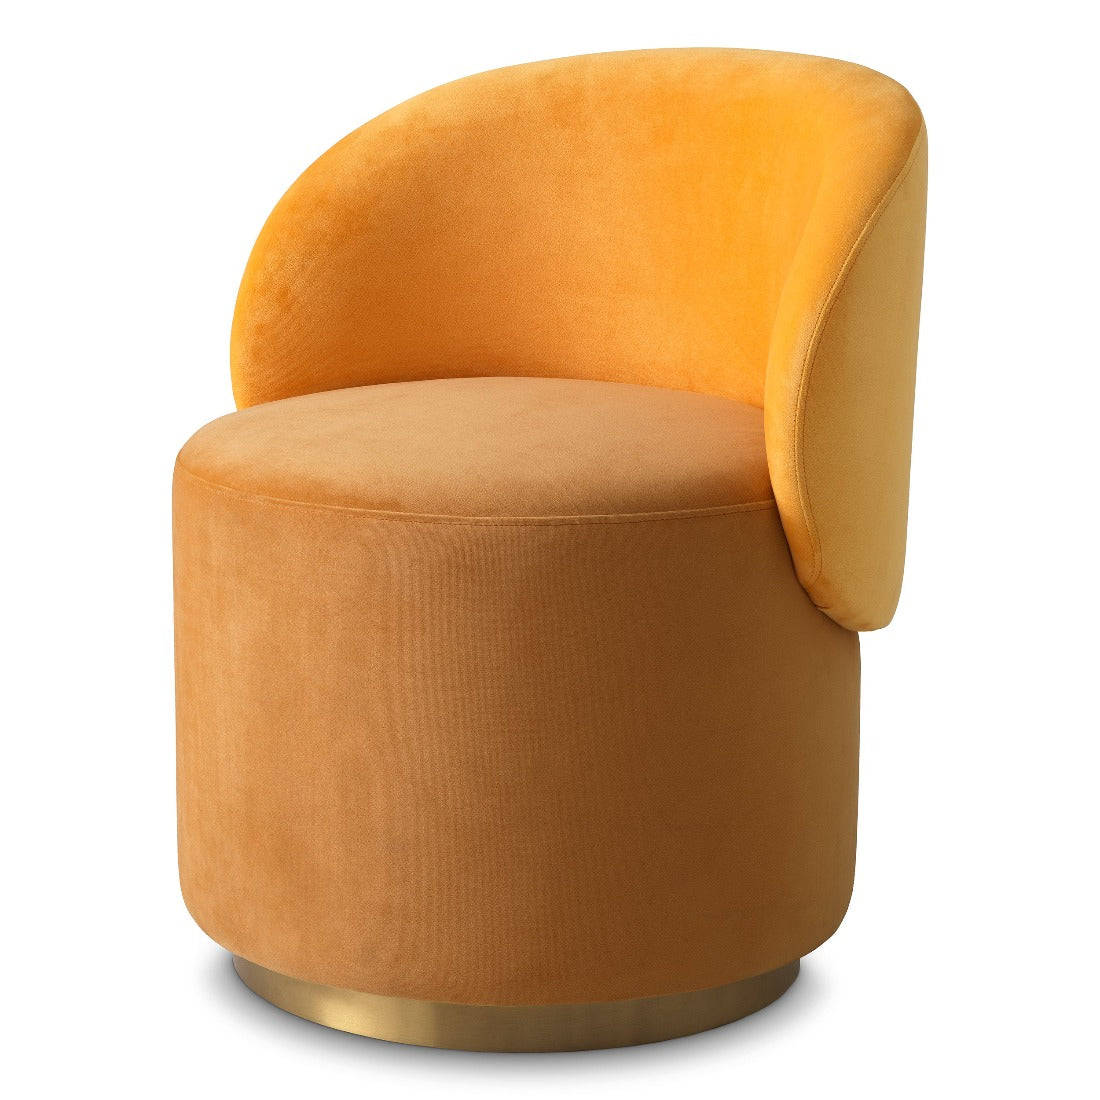 Low swivel dining chair Eichholtz Greer yellow